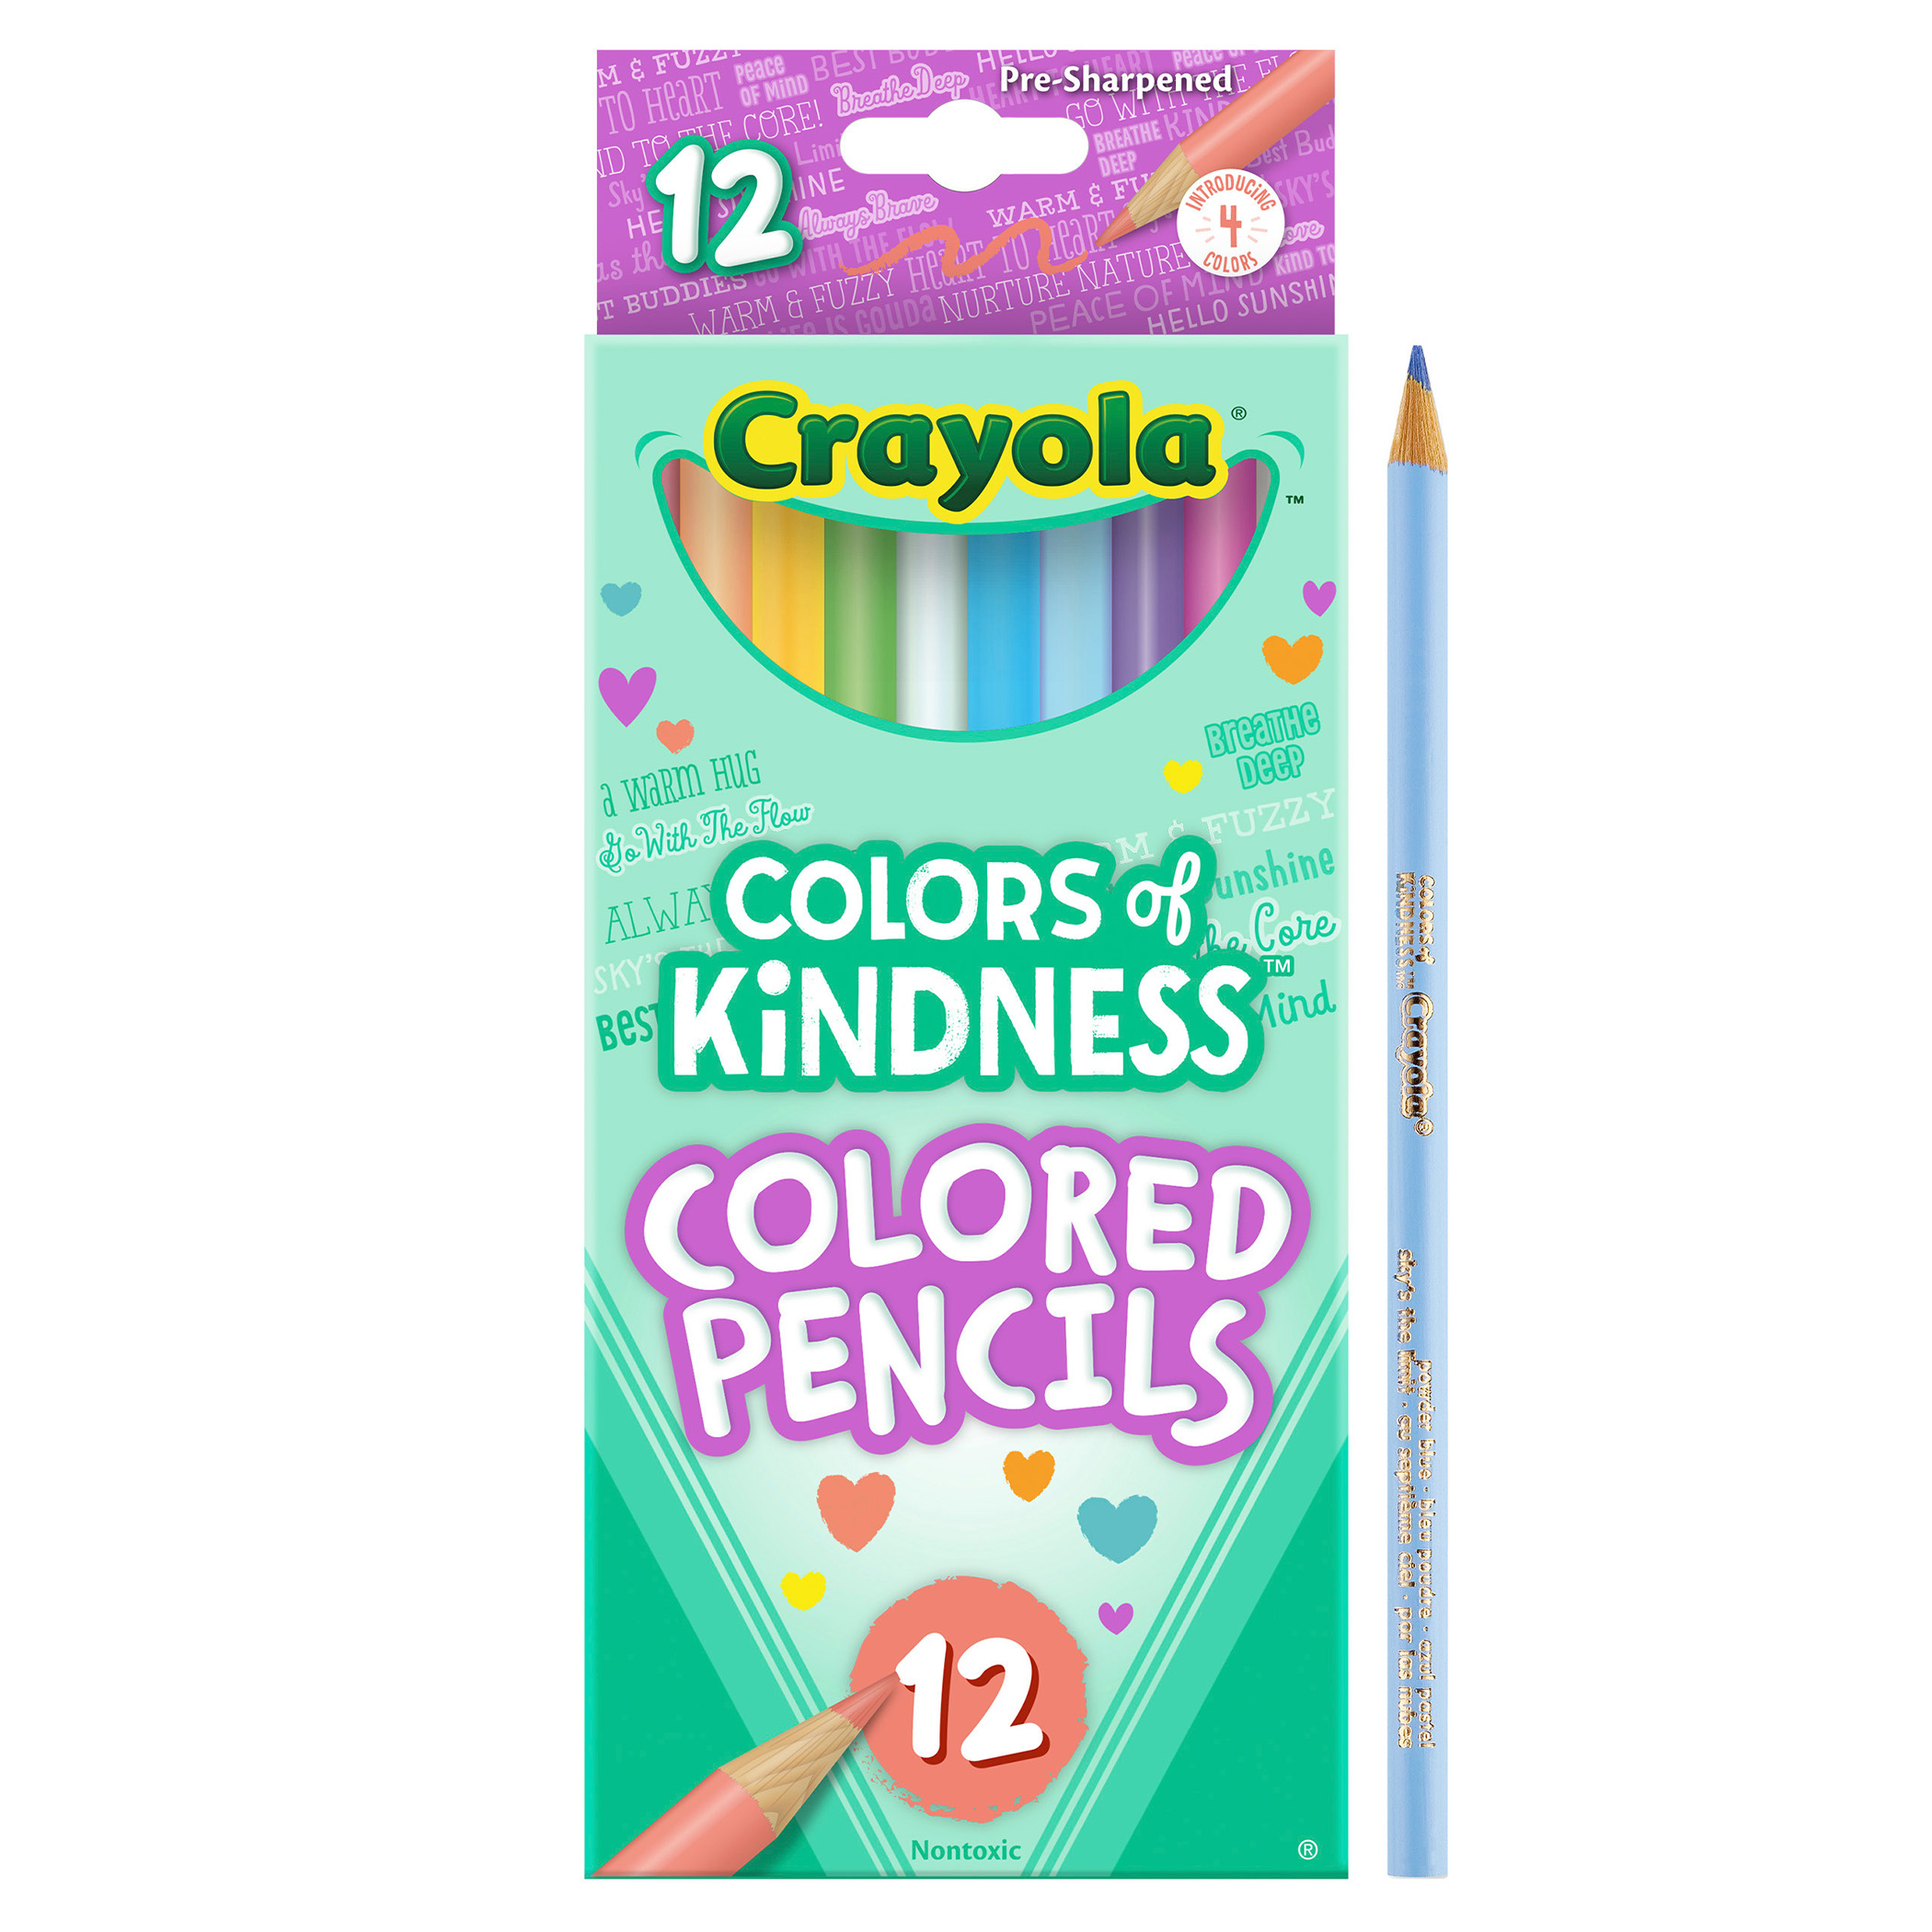 The Minted Children's Coloring Book 58 pages. Colored pencils